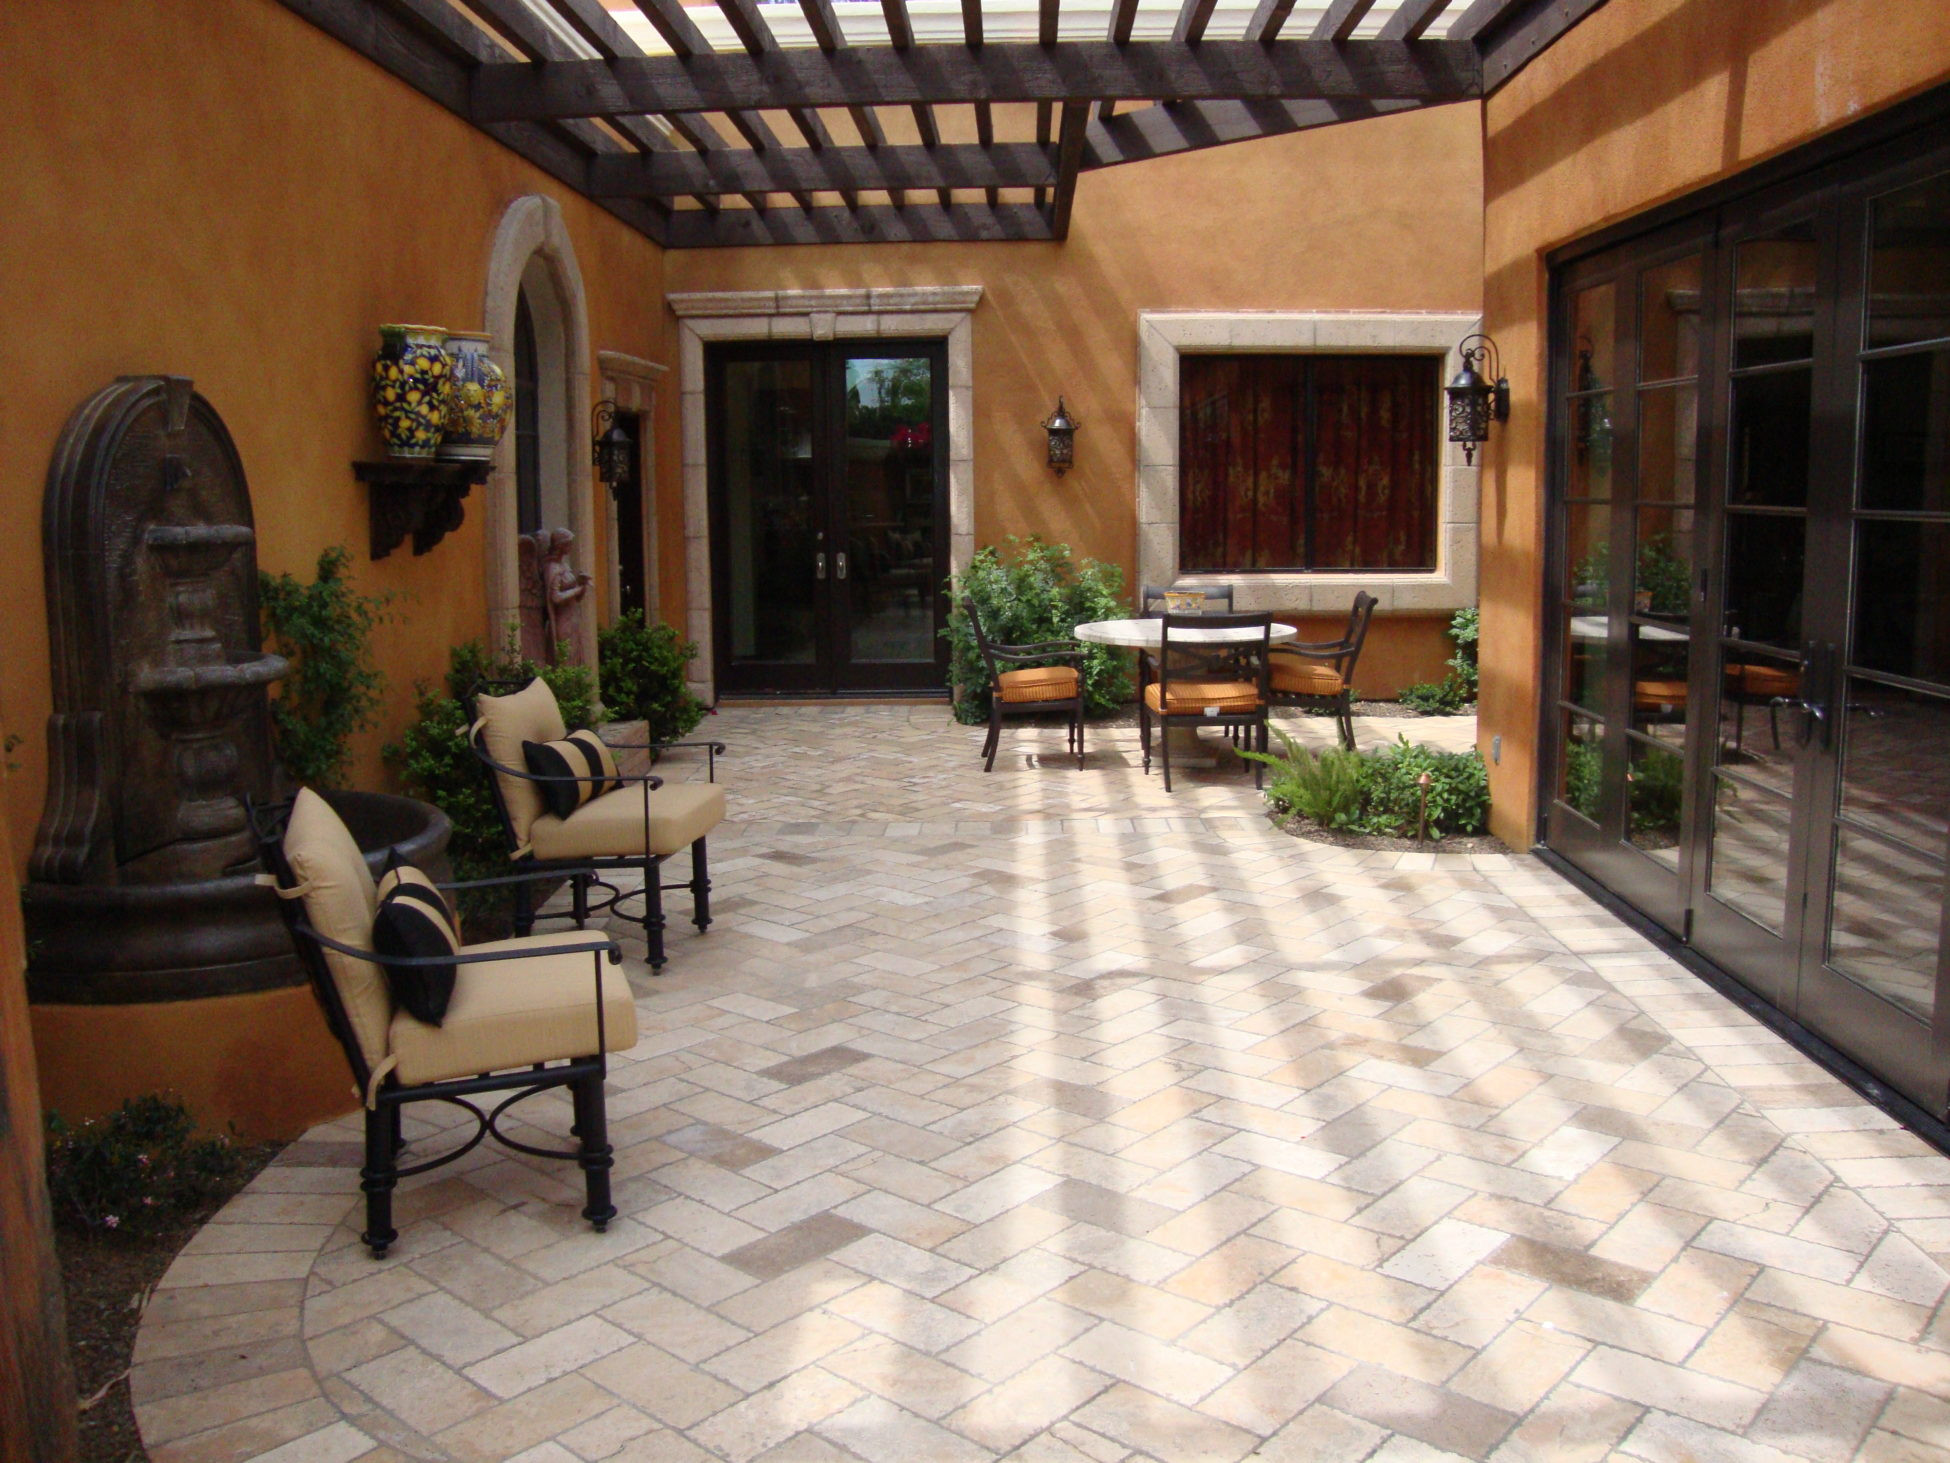 Outdoor Landscape Pavers
 Paver Designs and Paver Ideas for Your Backyard Patios